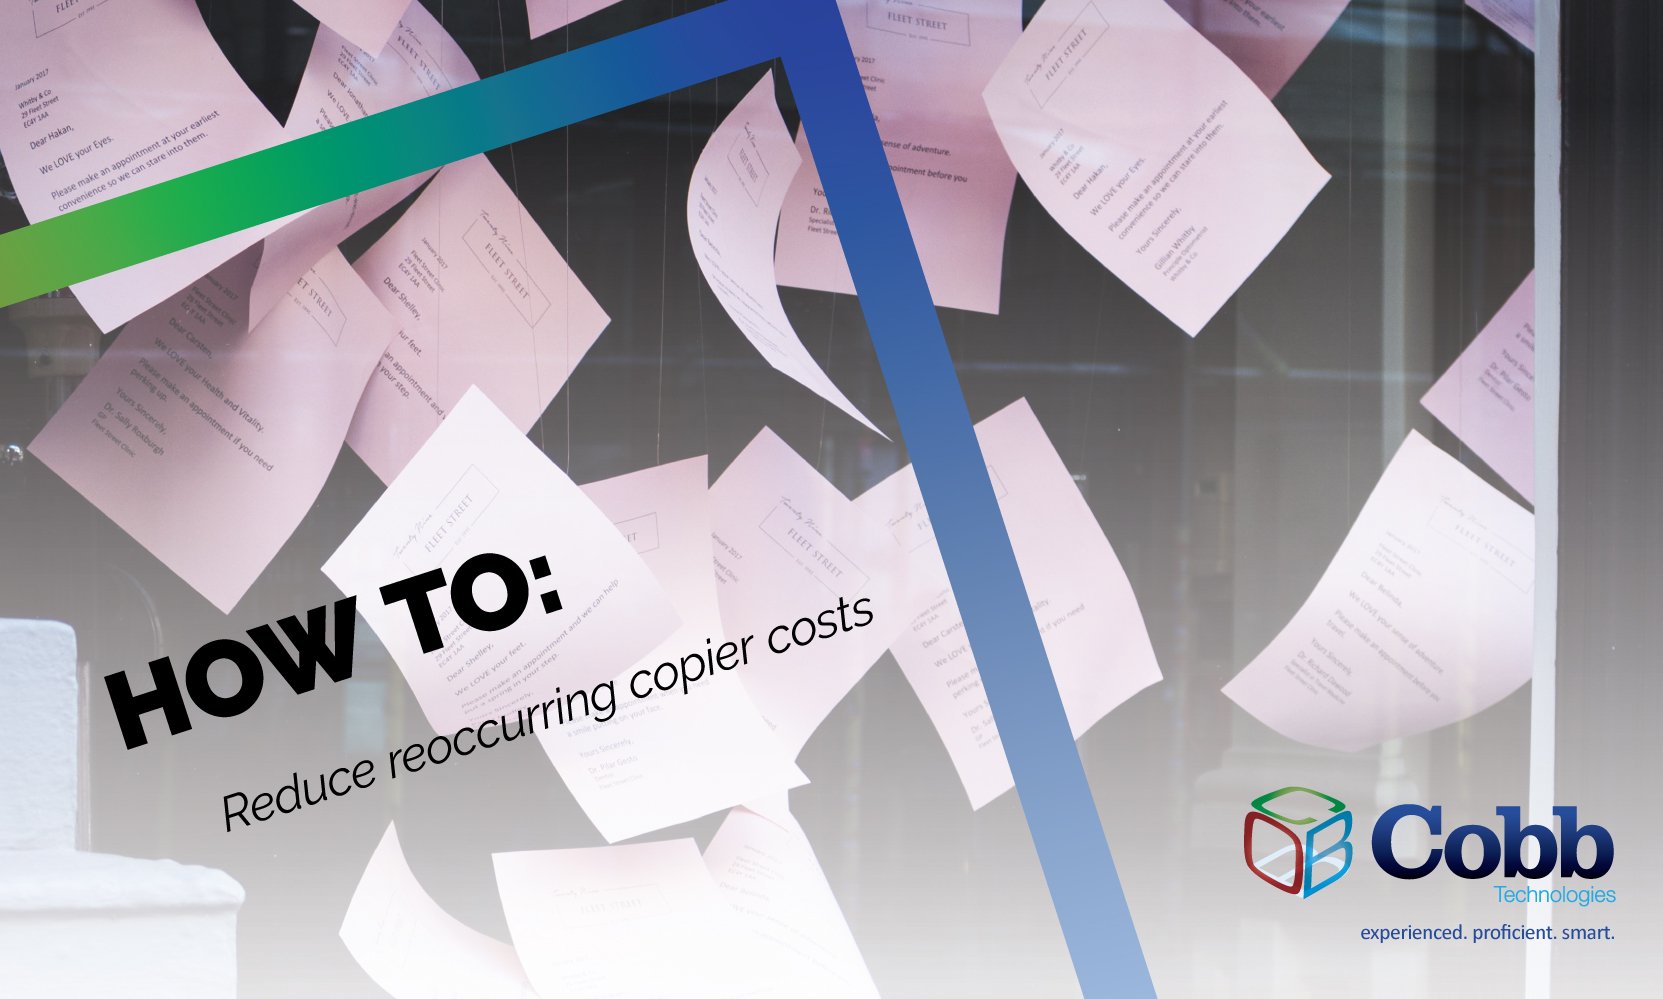 How Do I Save Money on Reoccurring Copier Costs?